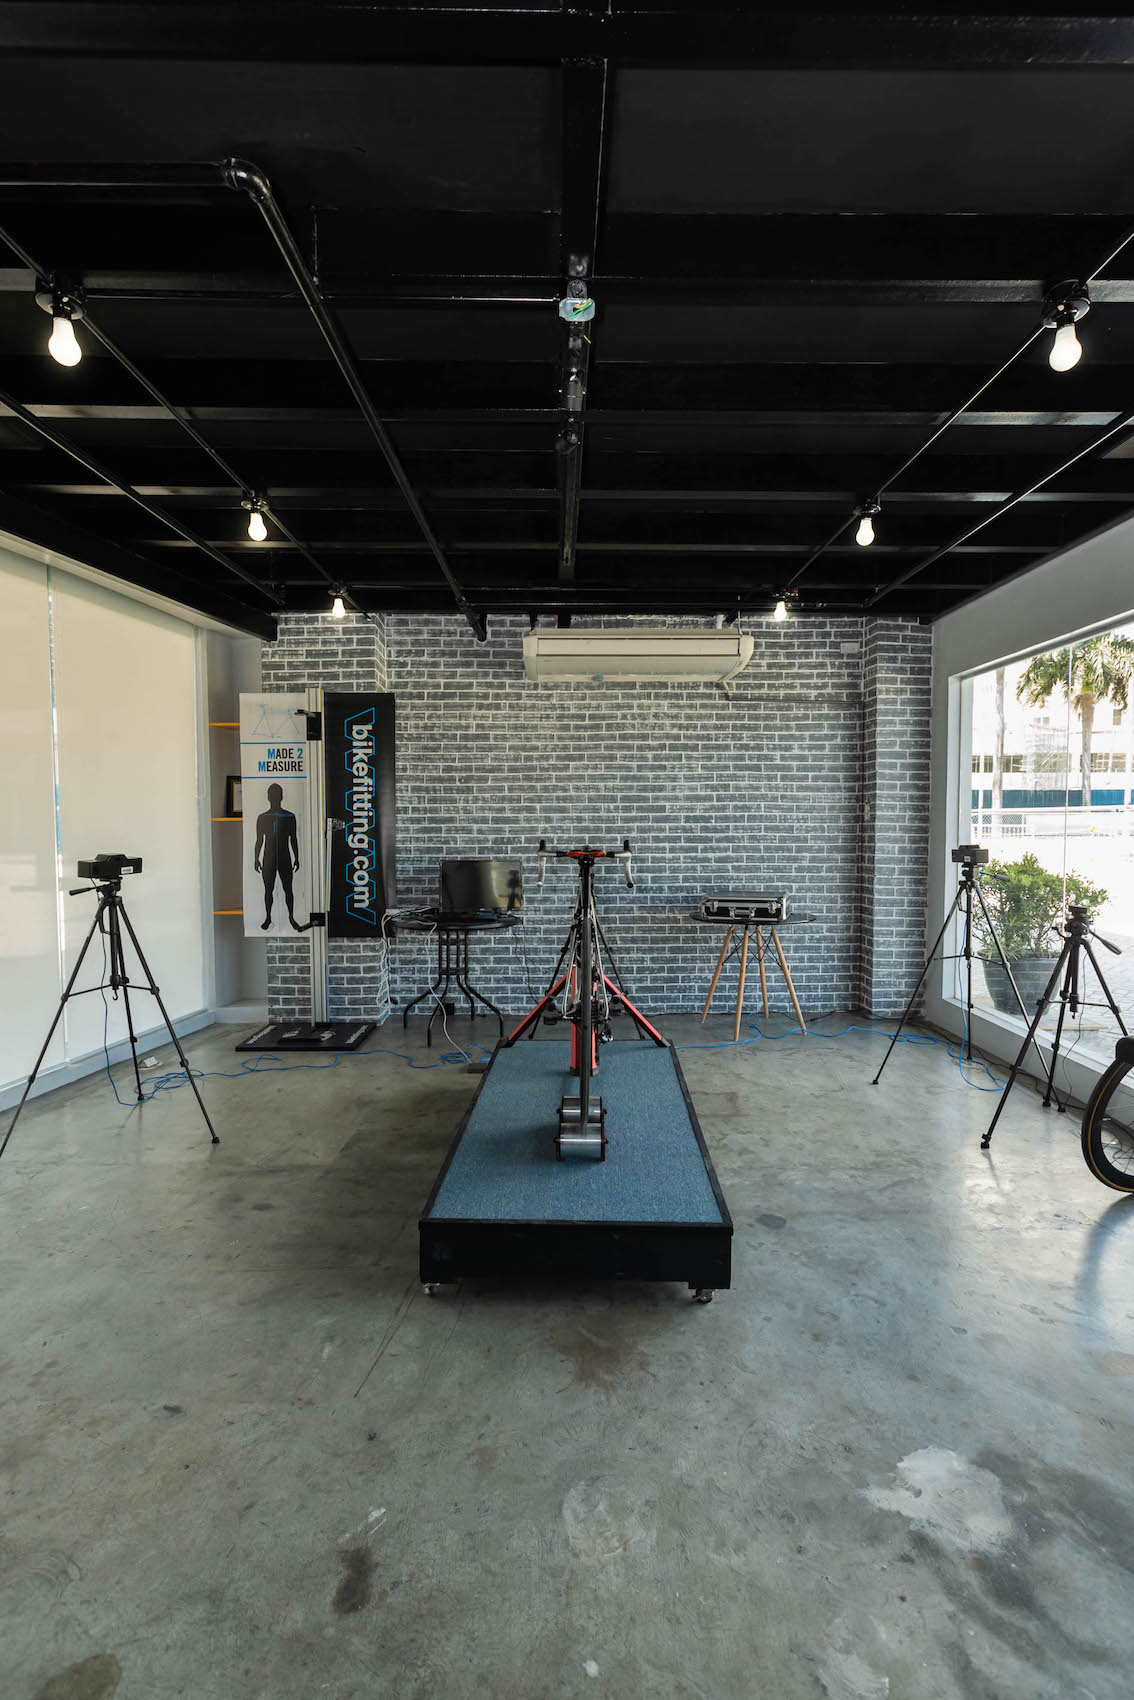 Bicycle studio, where bikes are fit for their owners. Photo: Celeste Cycles PH